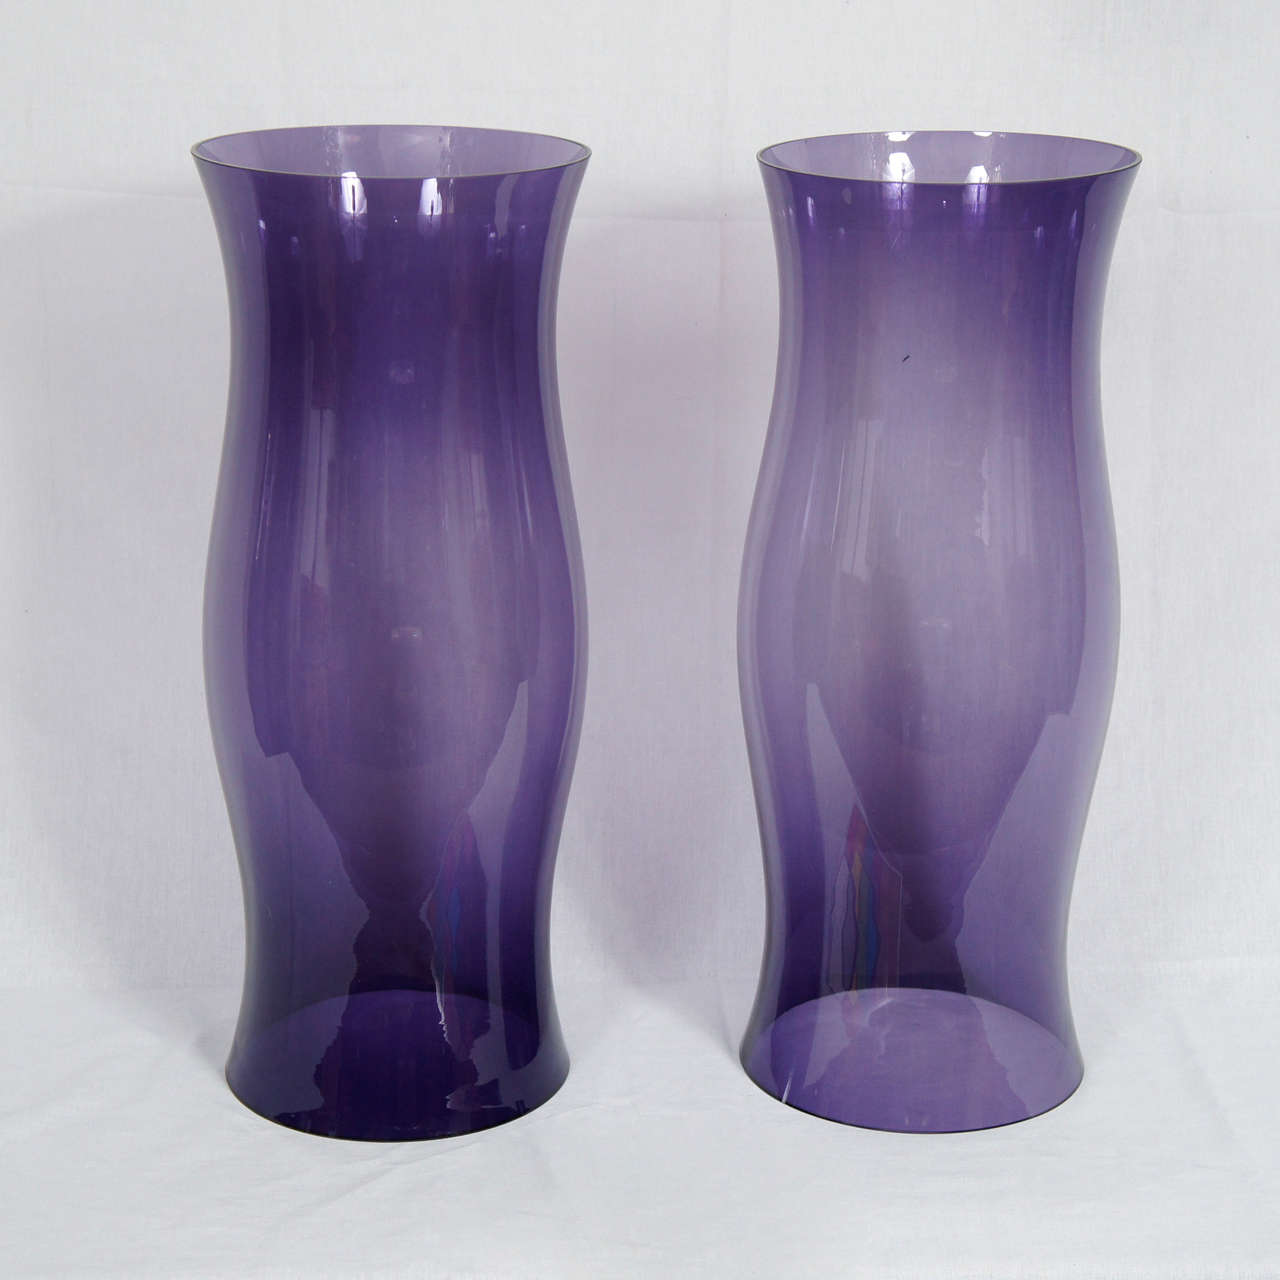 This large and impressive pair of Hurricanes are hand blown and show the nature and character of that hand made work. Notice the subtle color changes that have occurred within the mixing and blowing process. The glass has been mixed with manganese